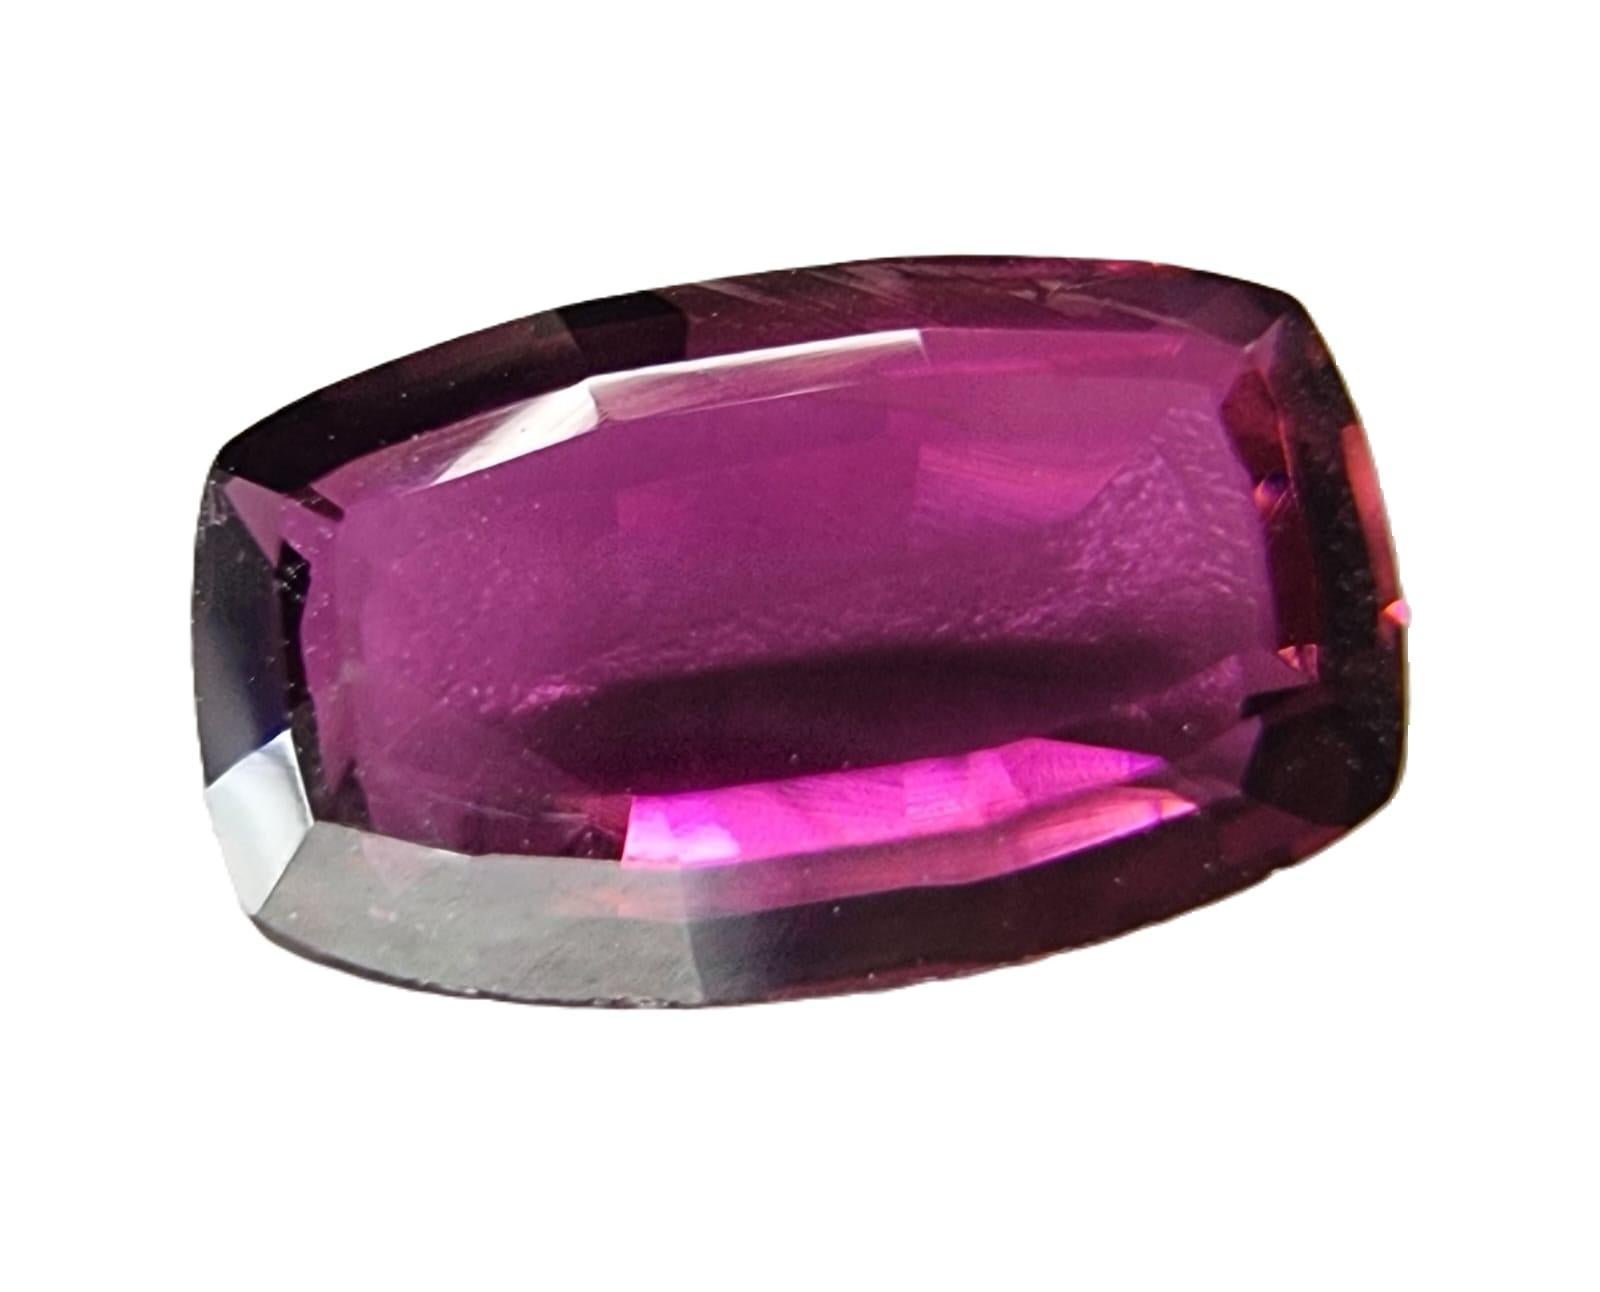 Oval Cut 2.6ct Oval Pinkish Red Rubellite Tourmaline Gemstone  For Sale